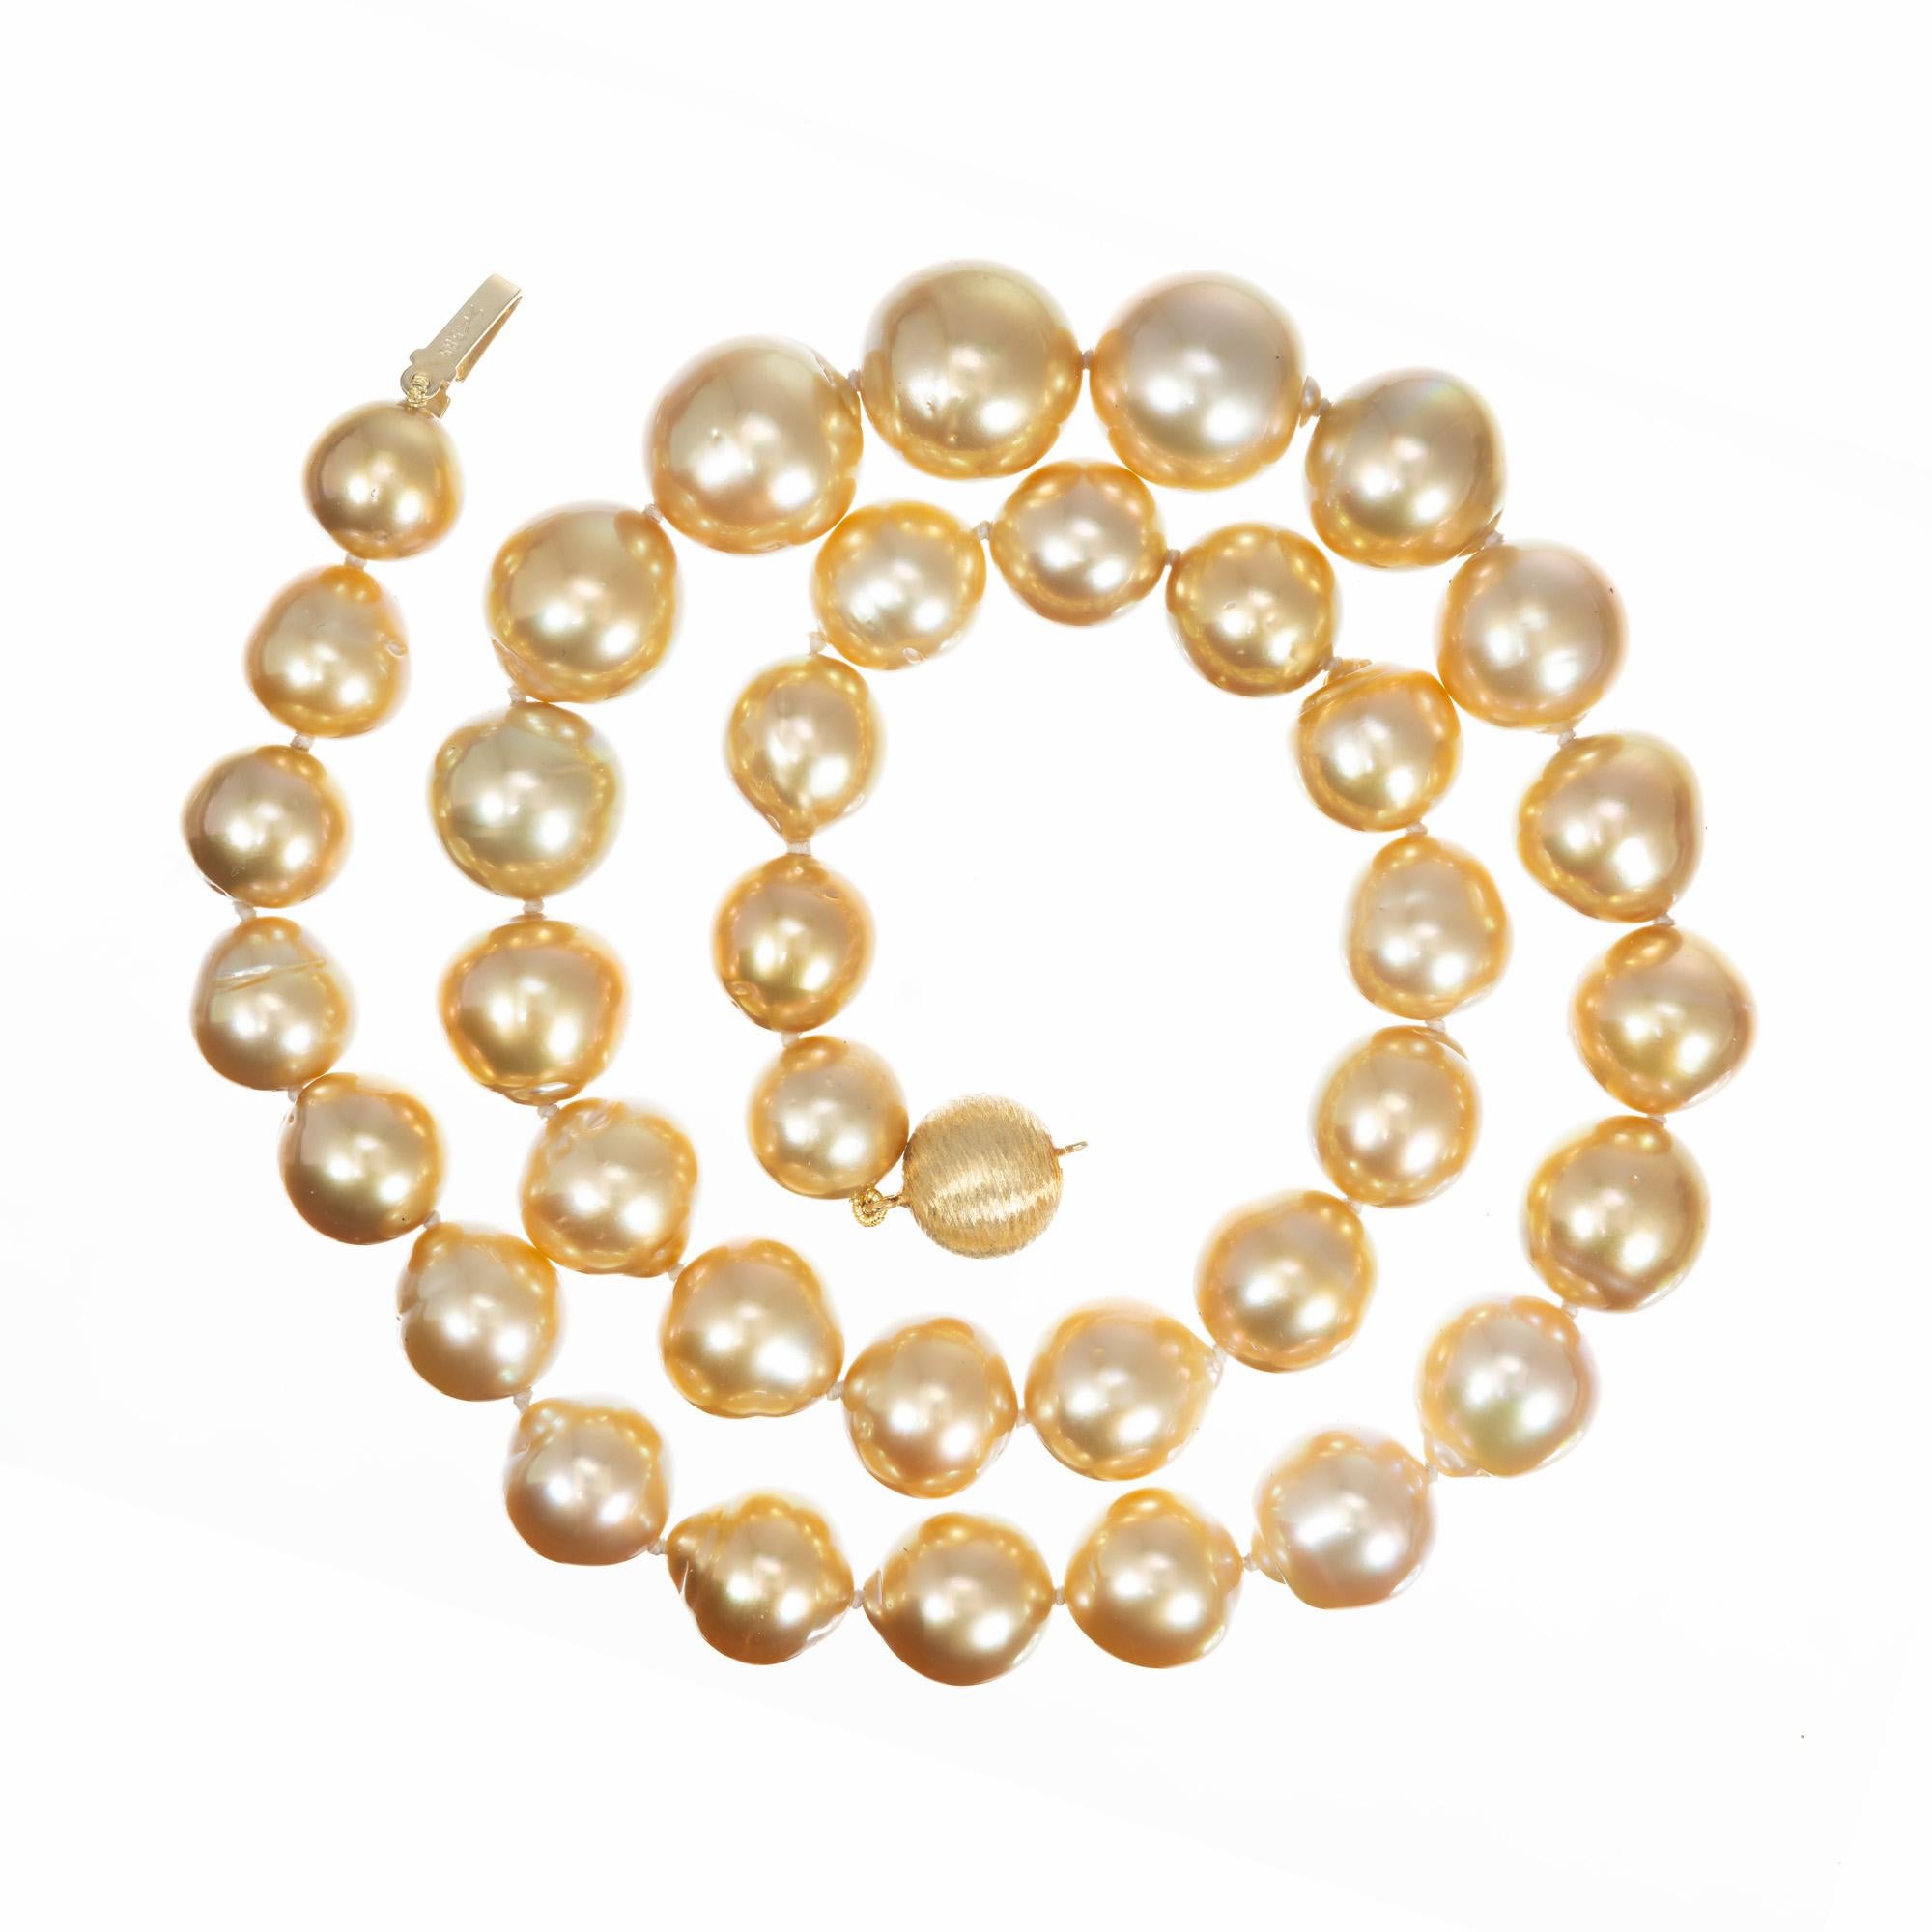 Rich golden yellow graduated pearl necklace. 37 round South Sea cultured pearls, ranging is size from 10-13.5mm. Beautiful natural golden yellow color, semi baroque with great lustre. 18 inches in length with a 14k yellow gold textured ball clasp.